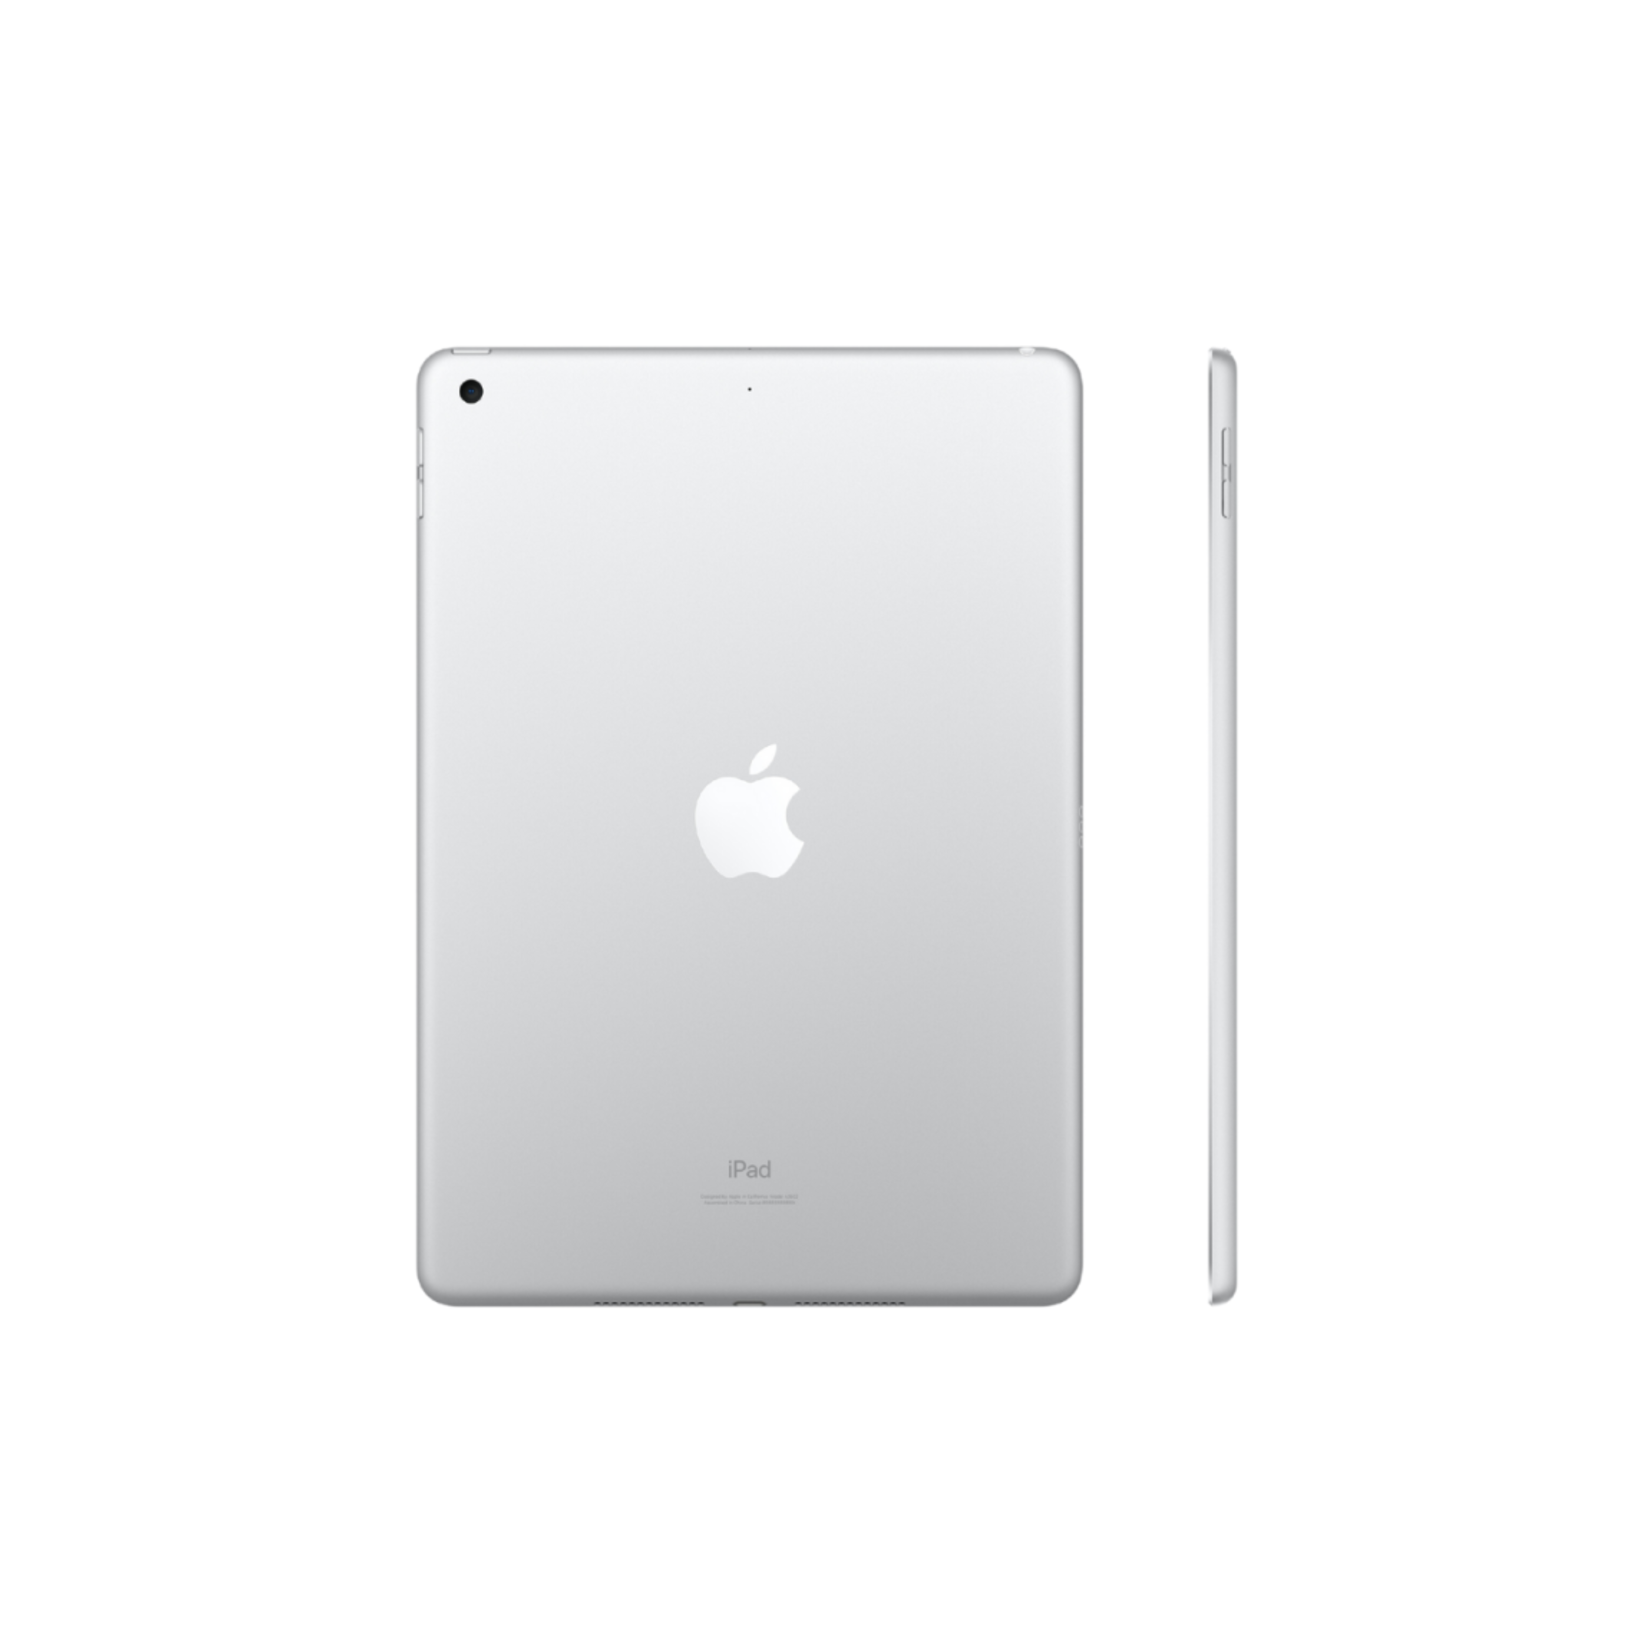 10.2-inch iPad (9th Generation) Wi-Fi - Silver - 64 GB - iJay Store - Apple  Authorized Campus Store